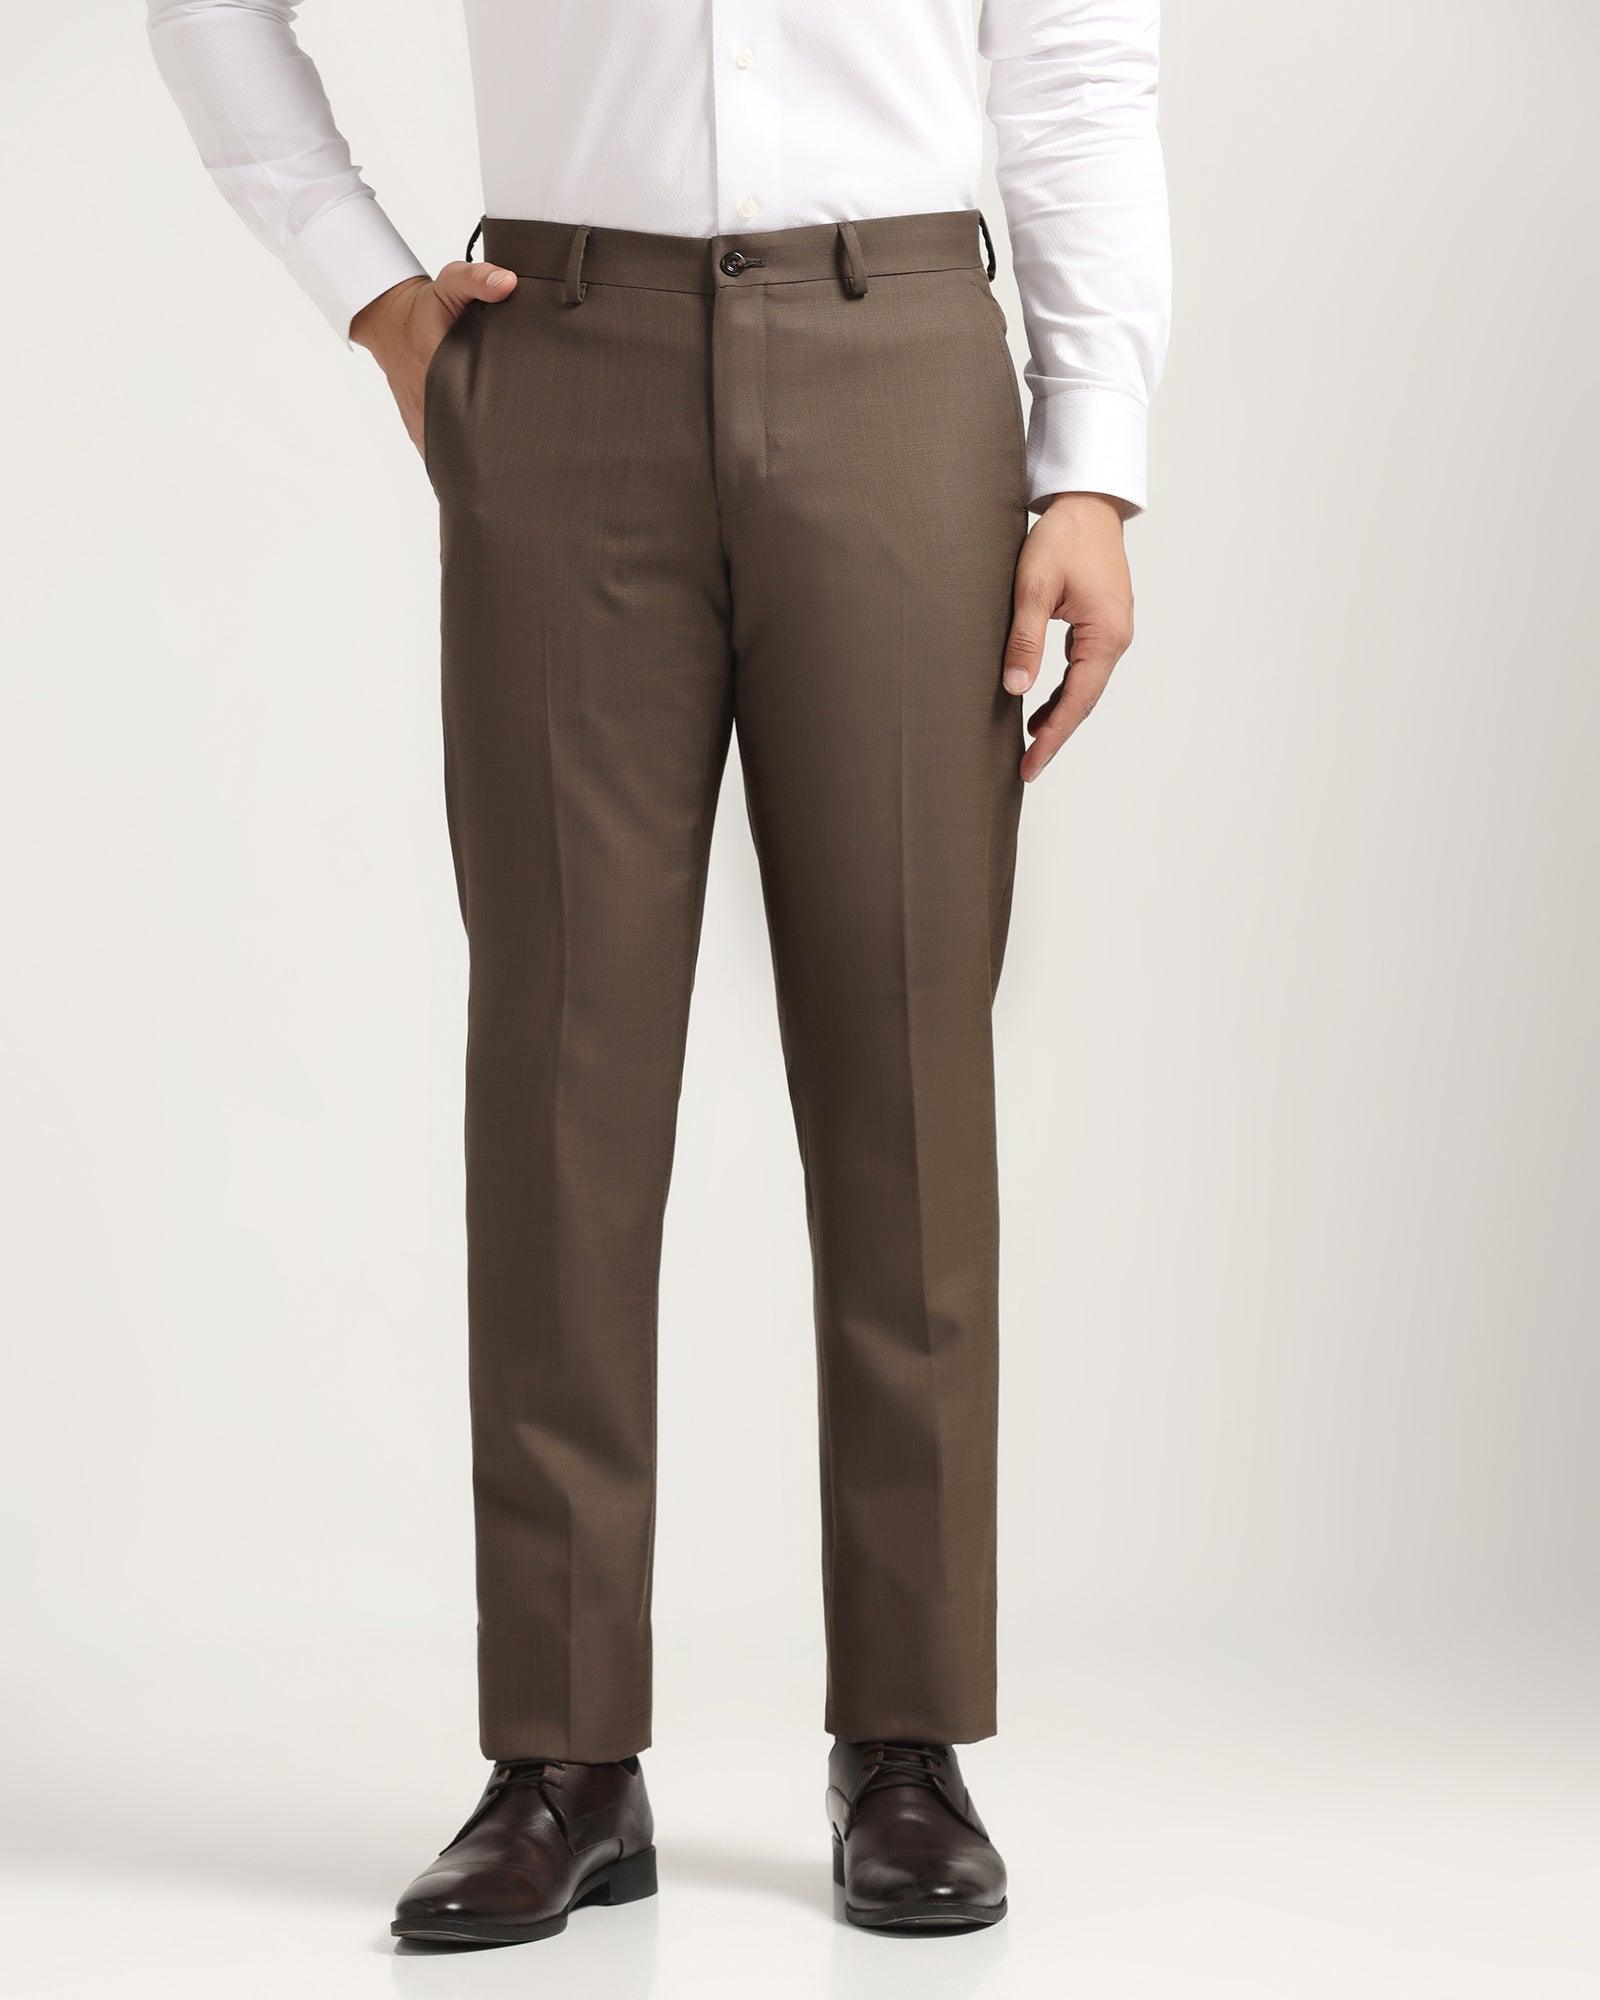 Luxe Slim Comfort B-95 Formal Black Check Trouser - Norm